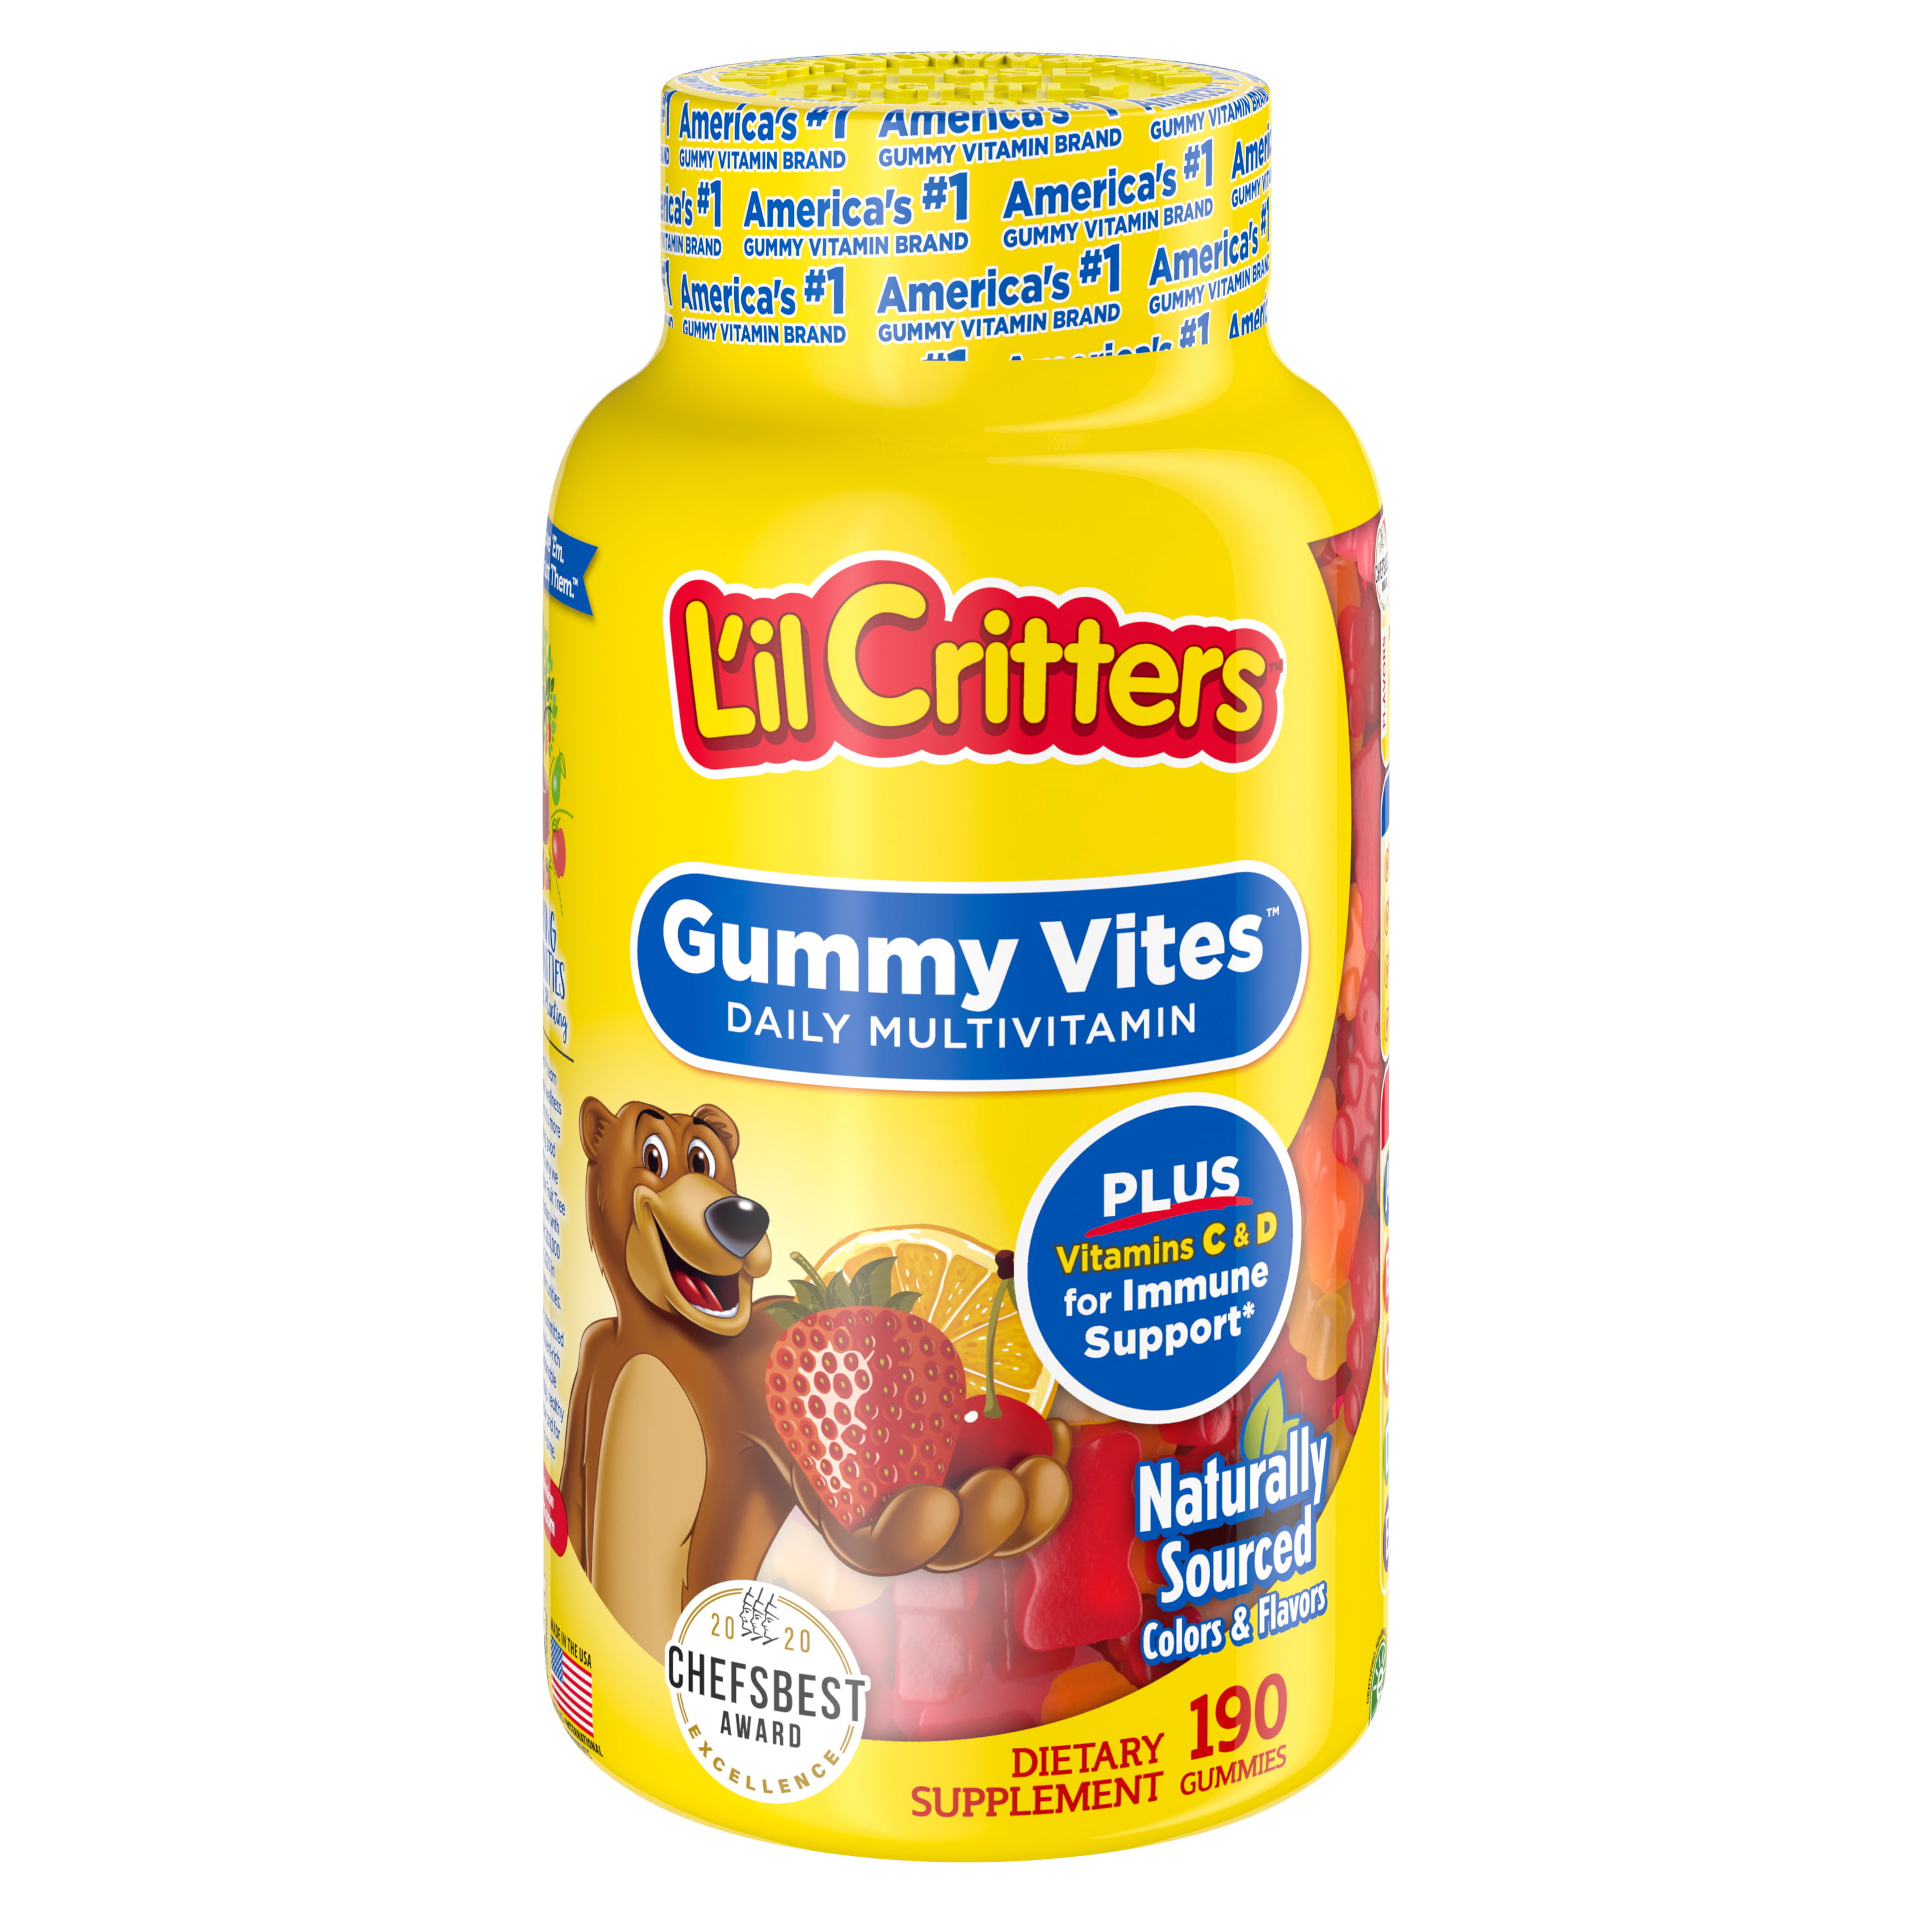 Toddler supplements